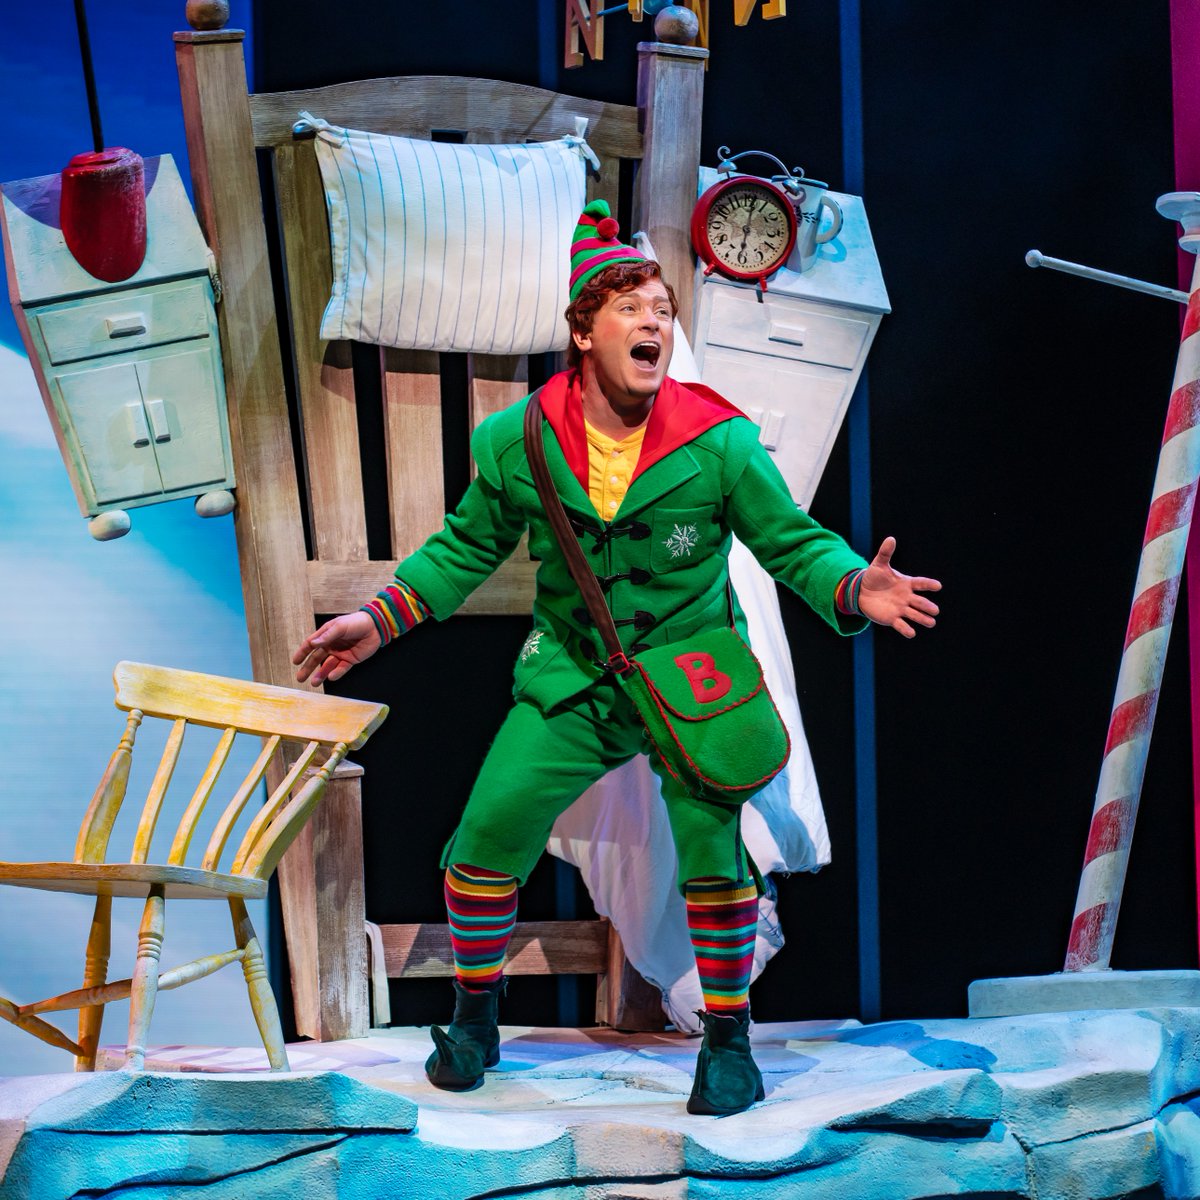 'I'm singing! I'm in a store and I'm singing!' 🎵 #ElfTheMusical